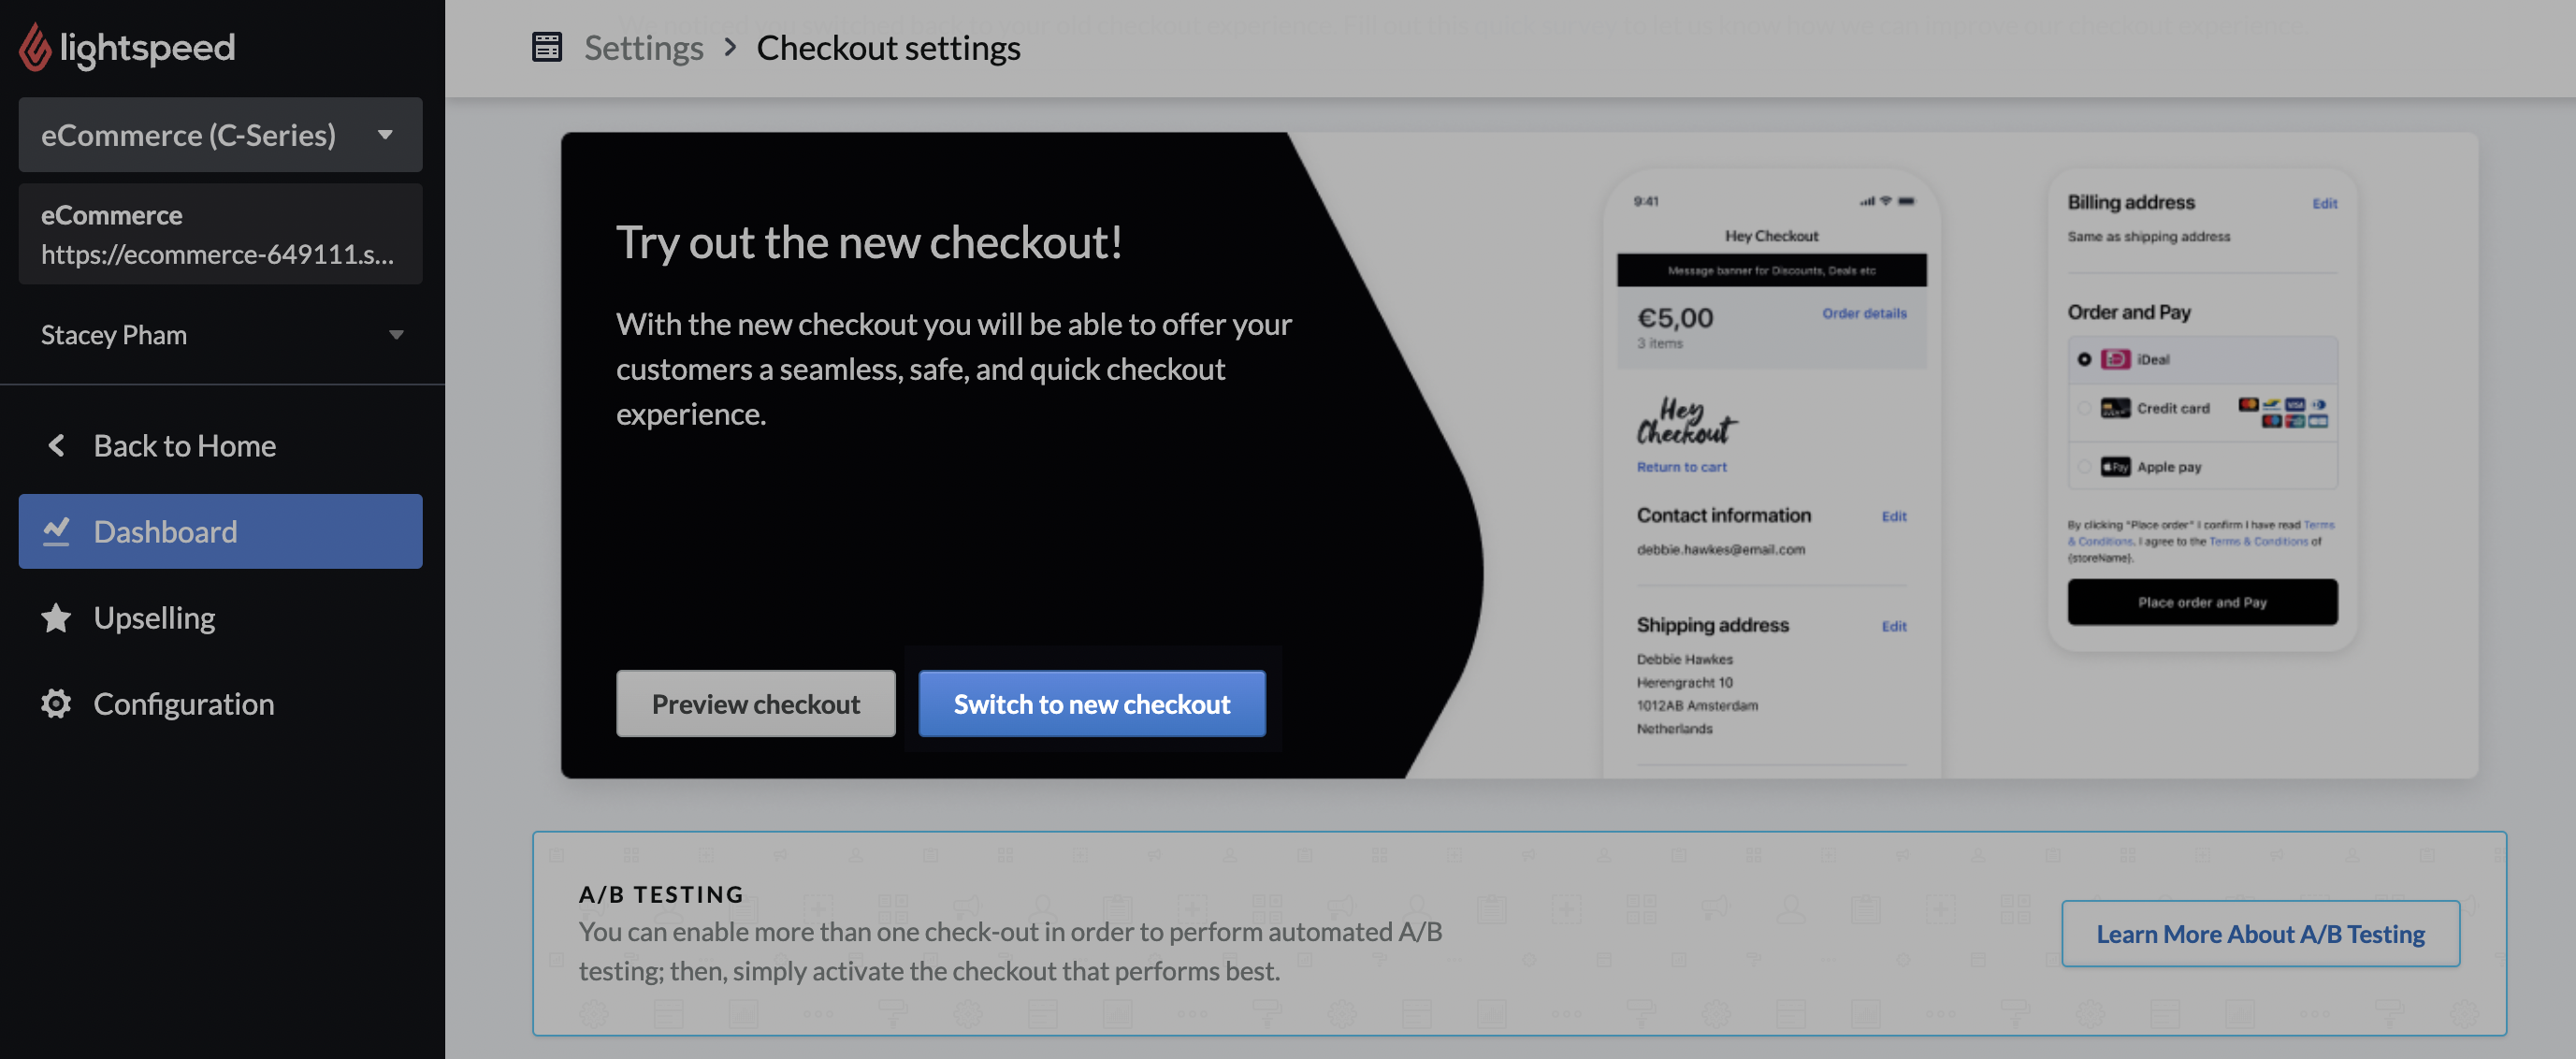 switch-to-new-checkout.png